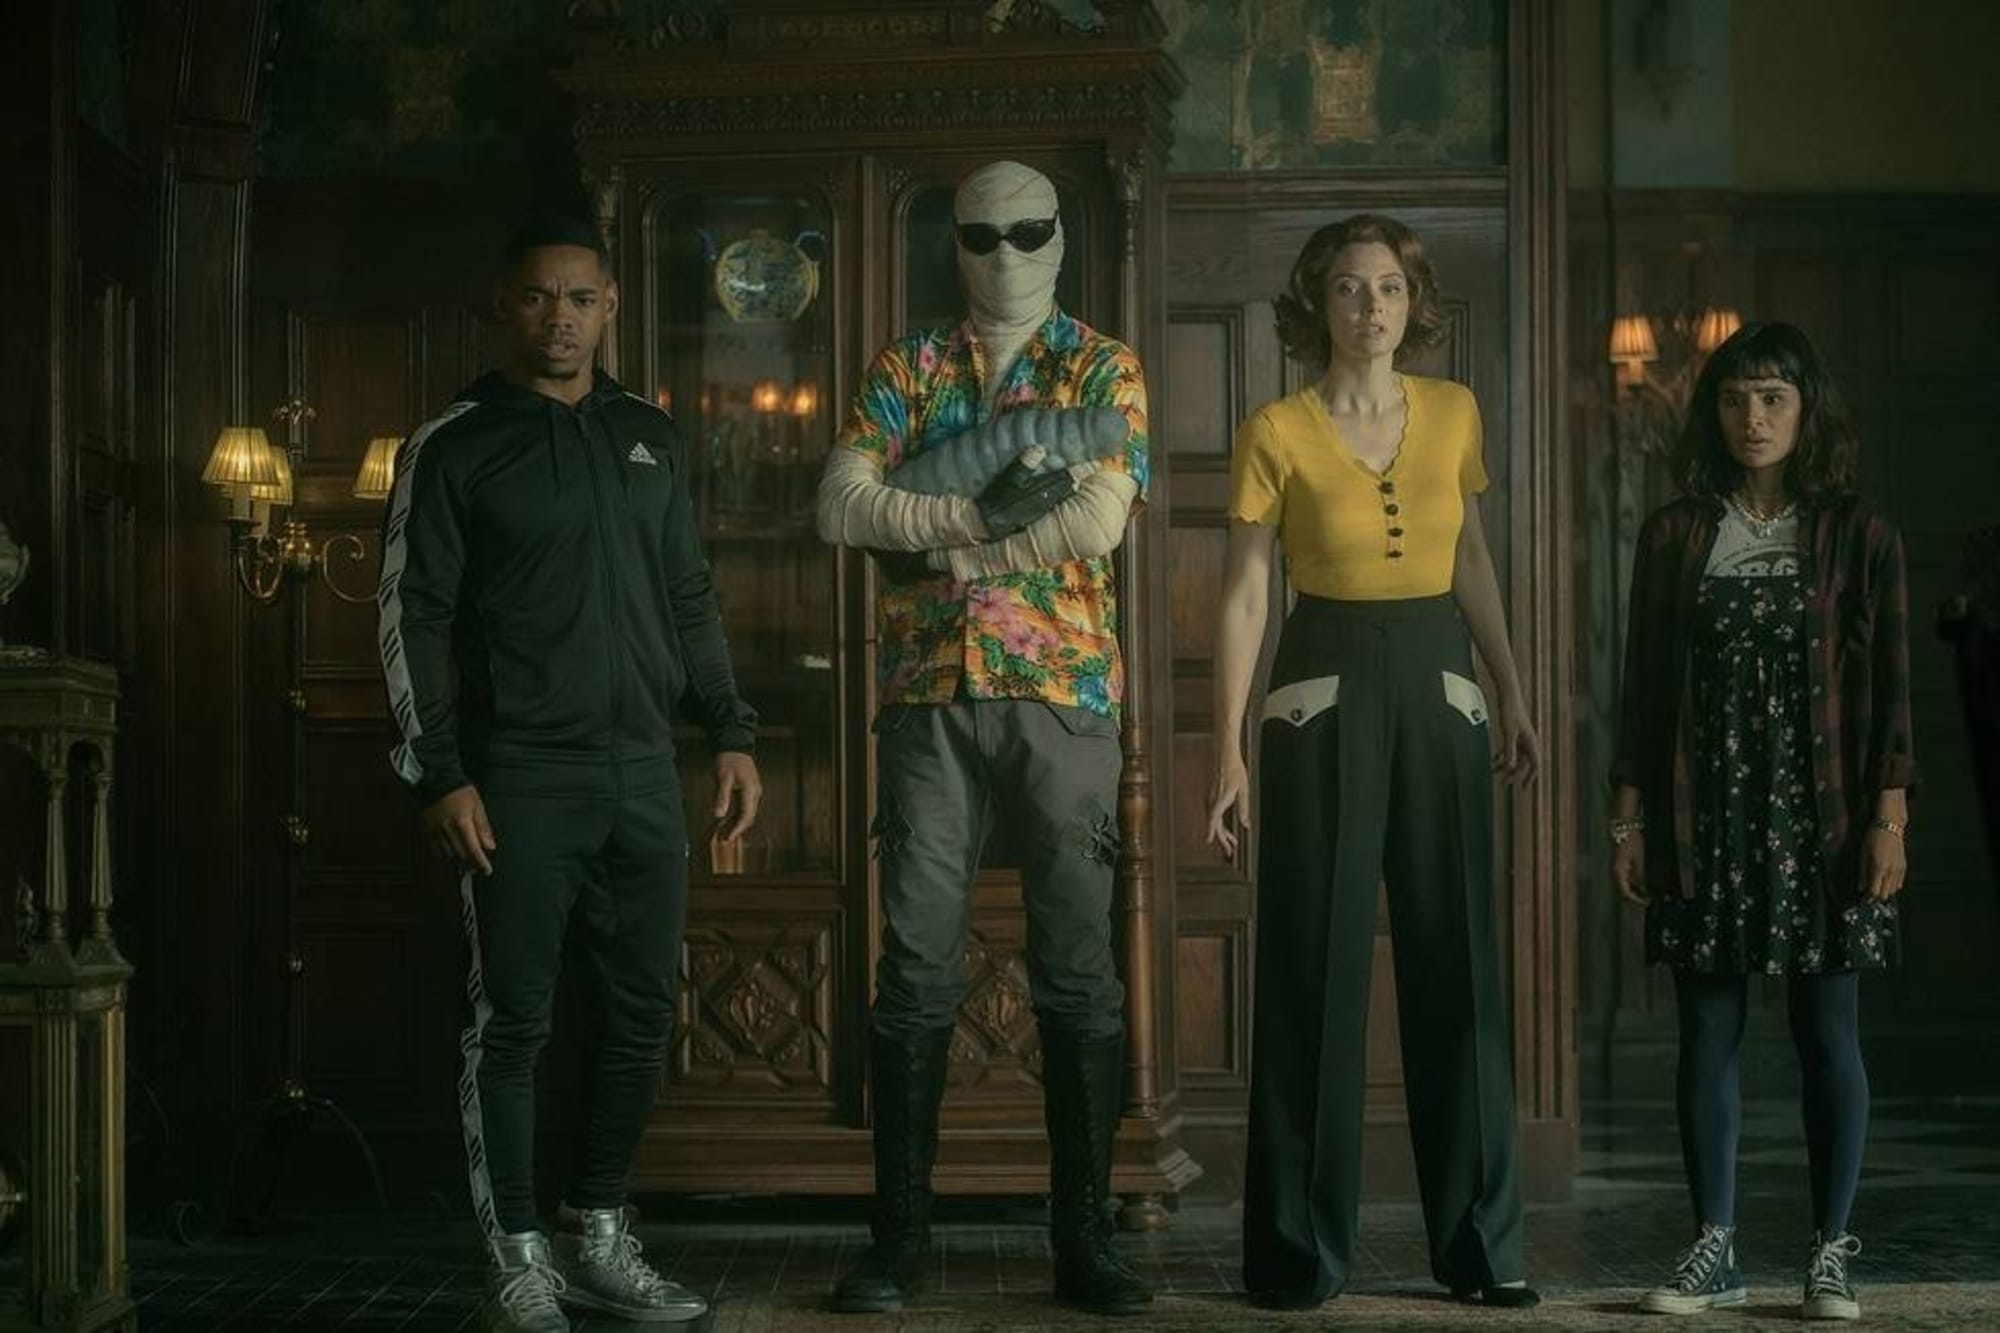 Review: Doom Patrol season 3 ends on a solid if unremarkable note